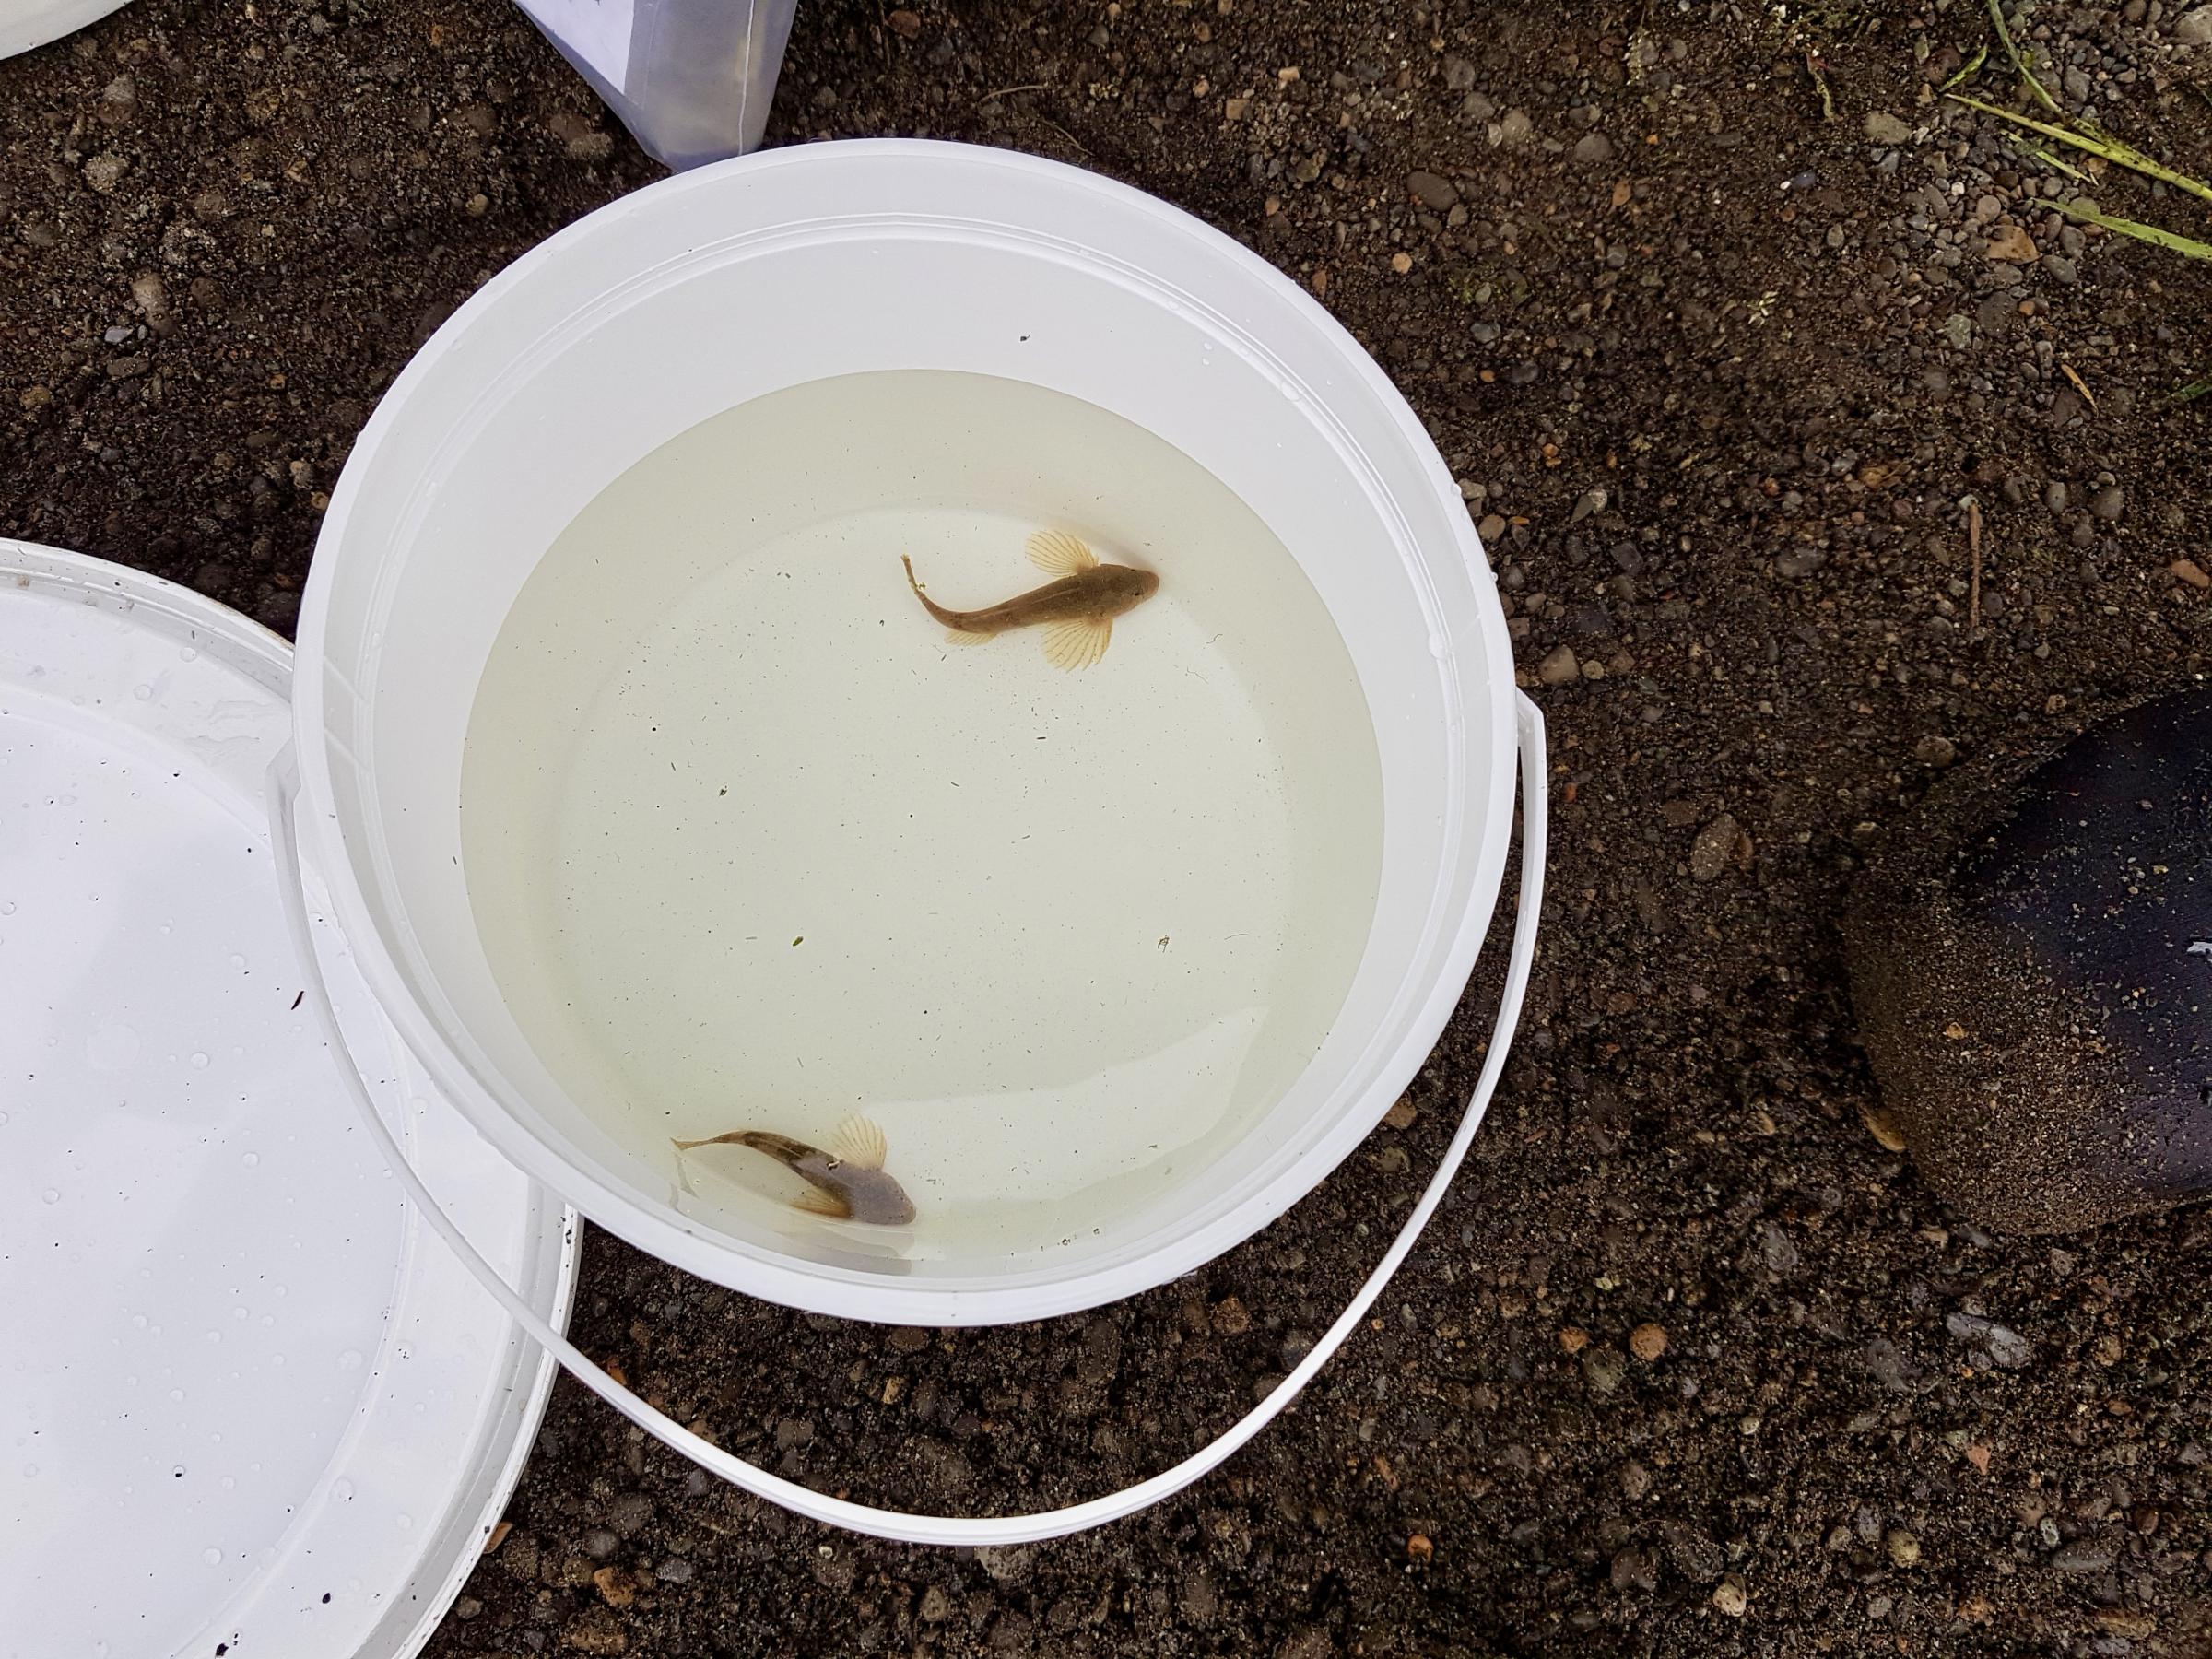 Campers caught juvenile salmon to weigh, measure and identify them by type. (Photo by Christine Trudeau/KYUK)